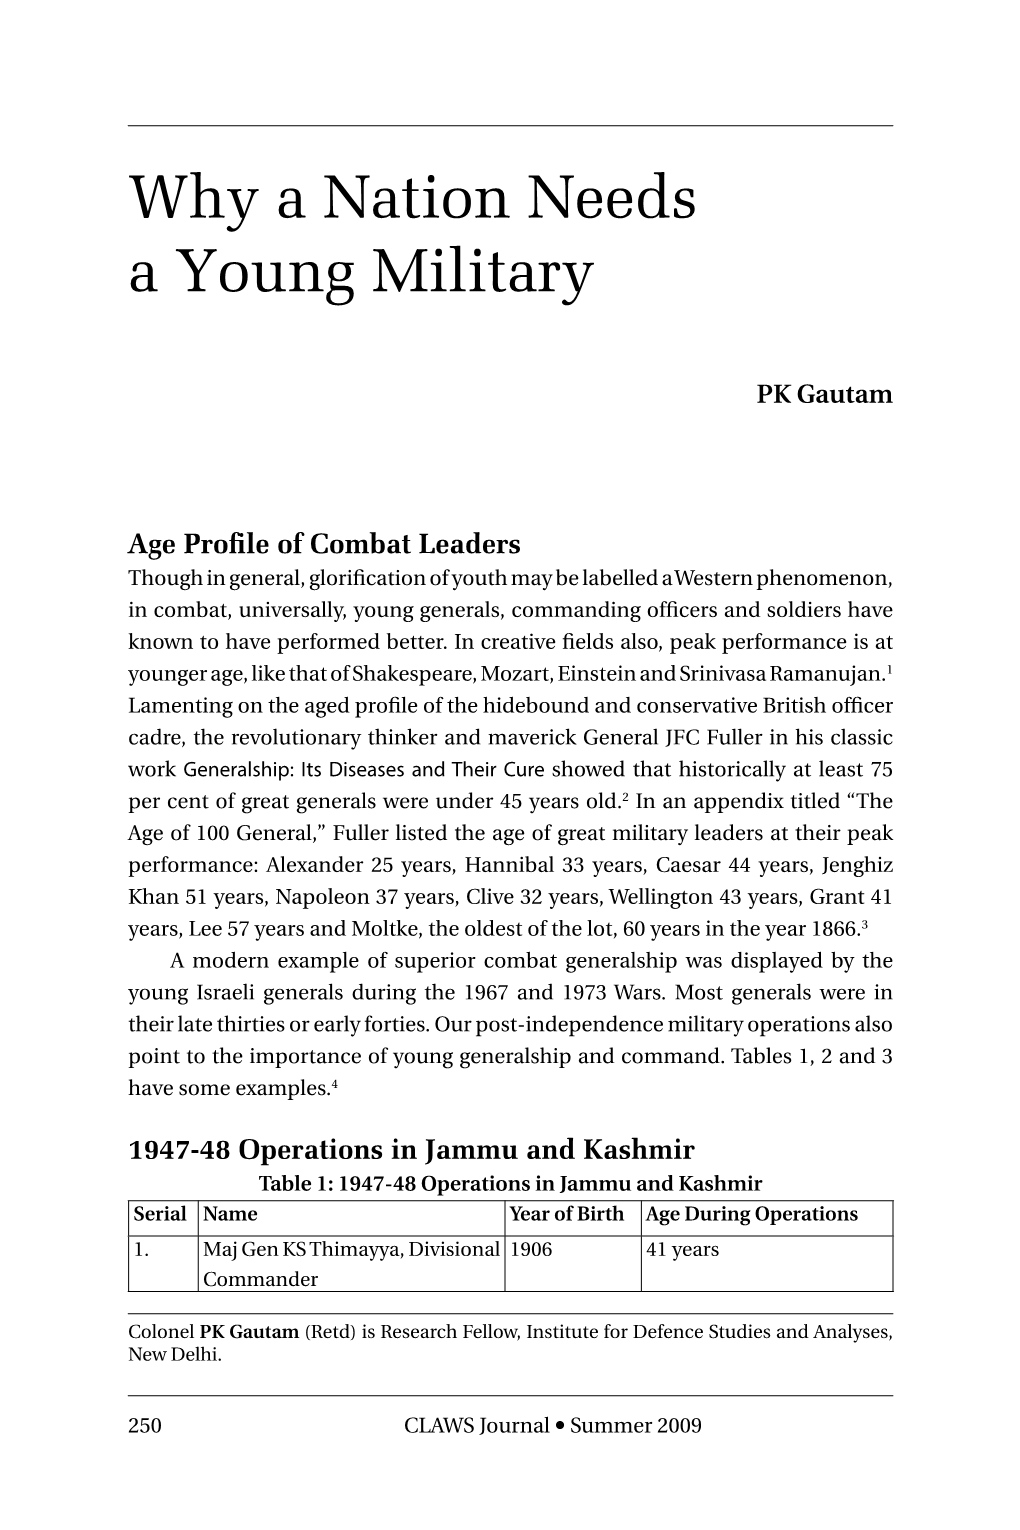 Why a Nation Needs a Young Military, by P K Gautam